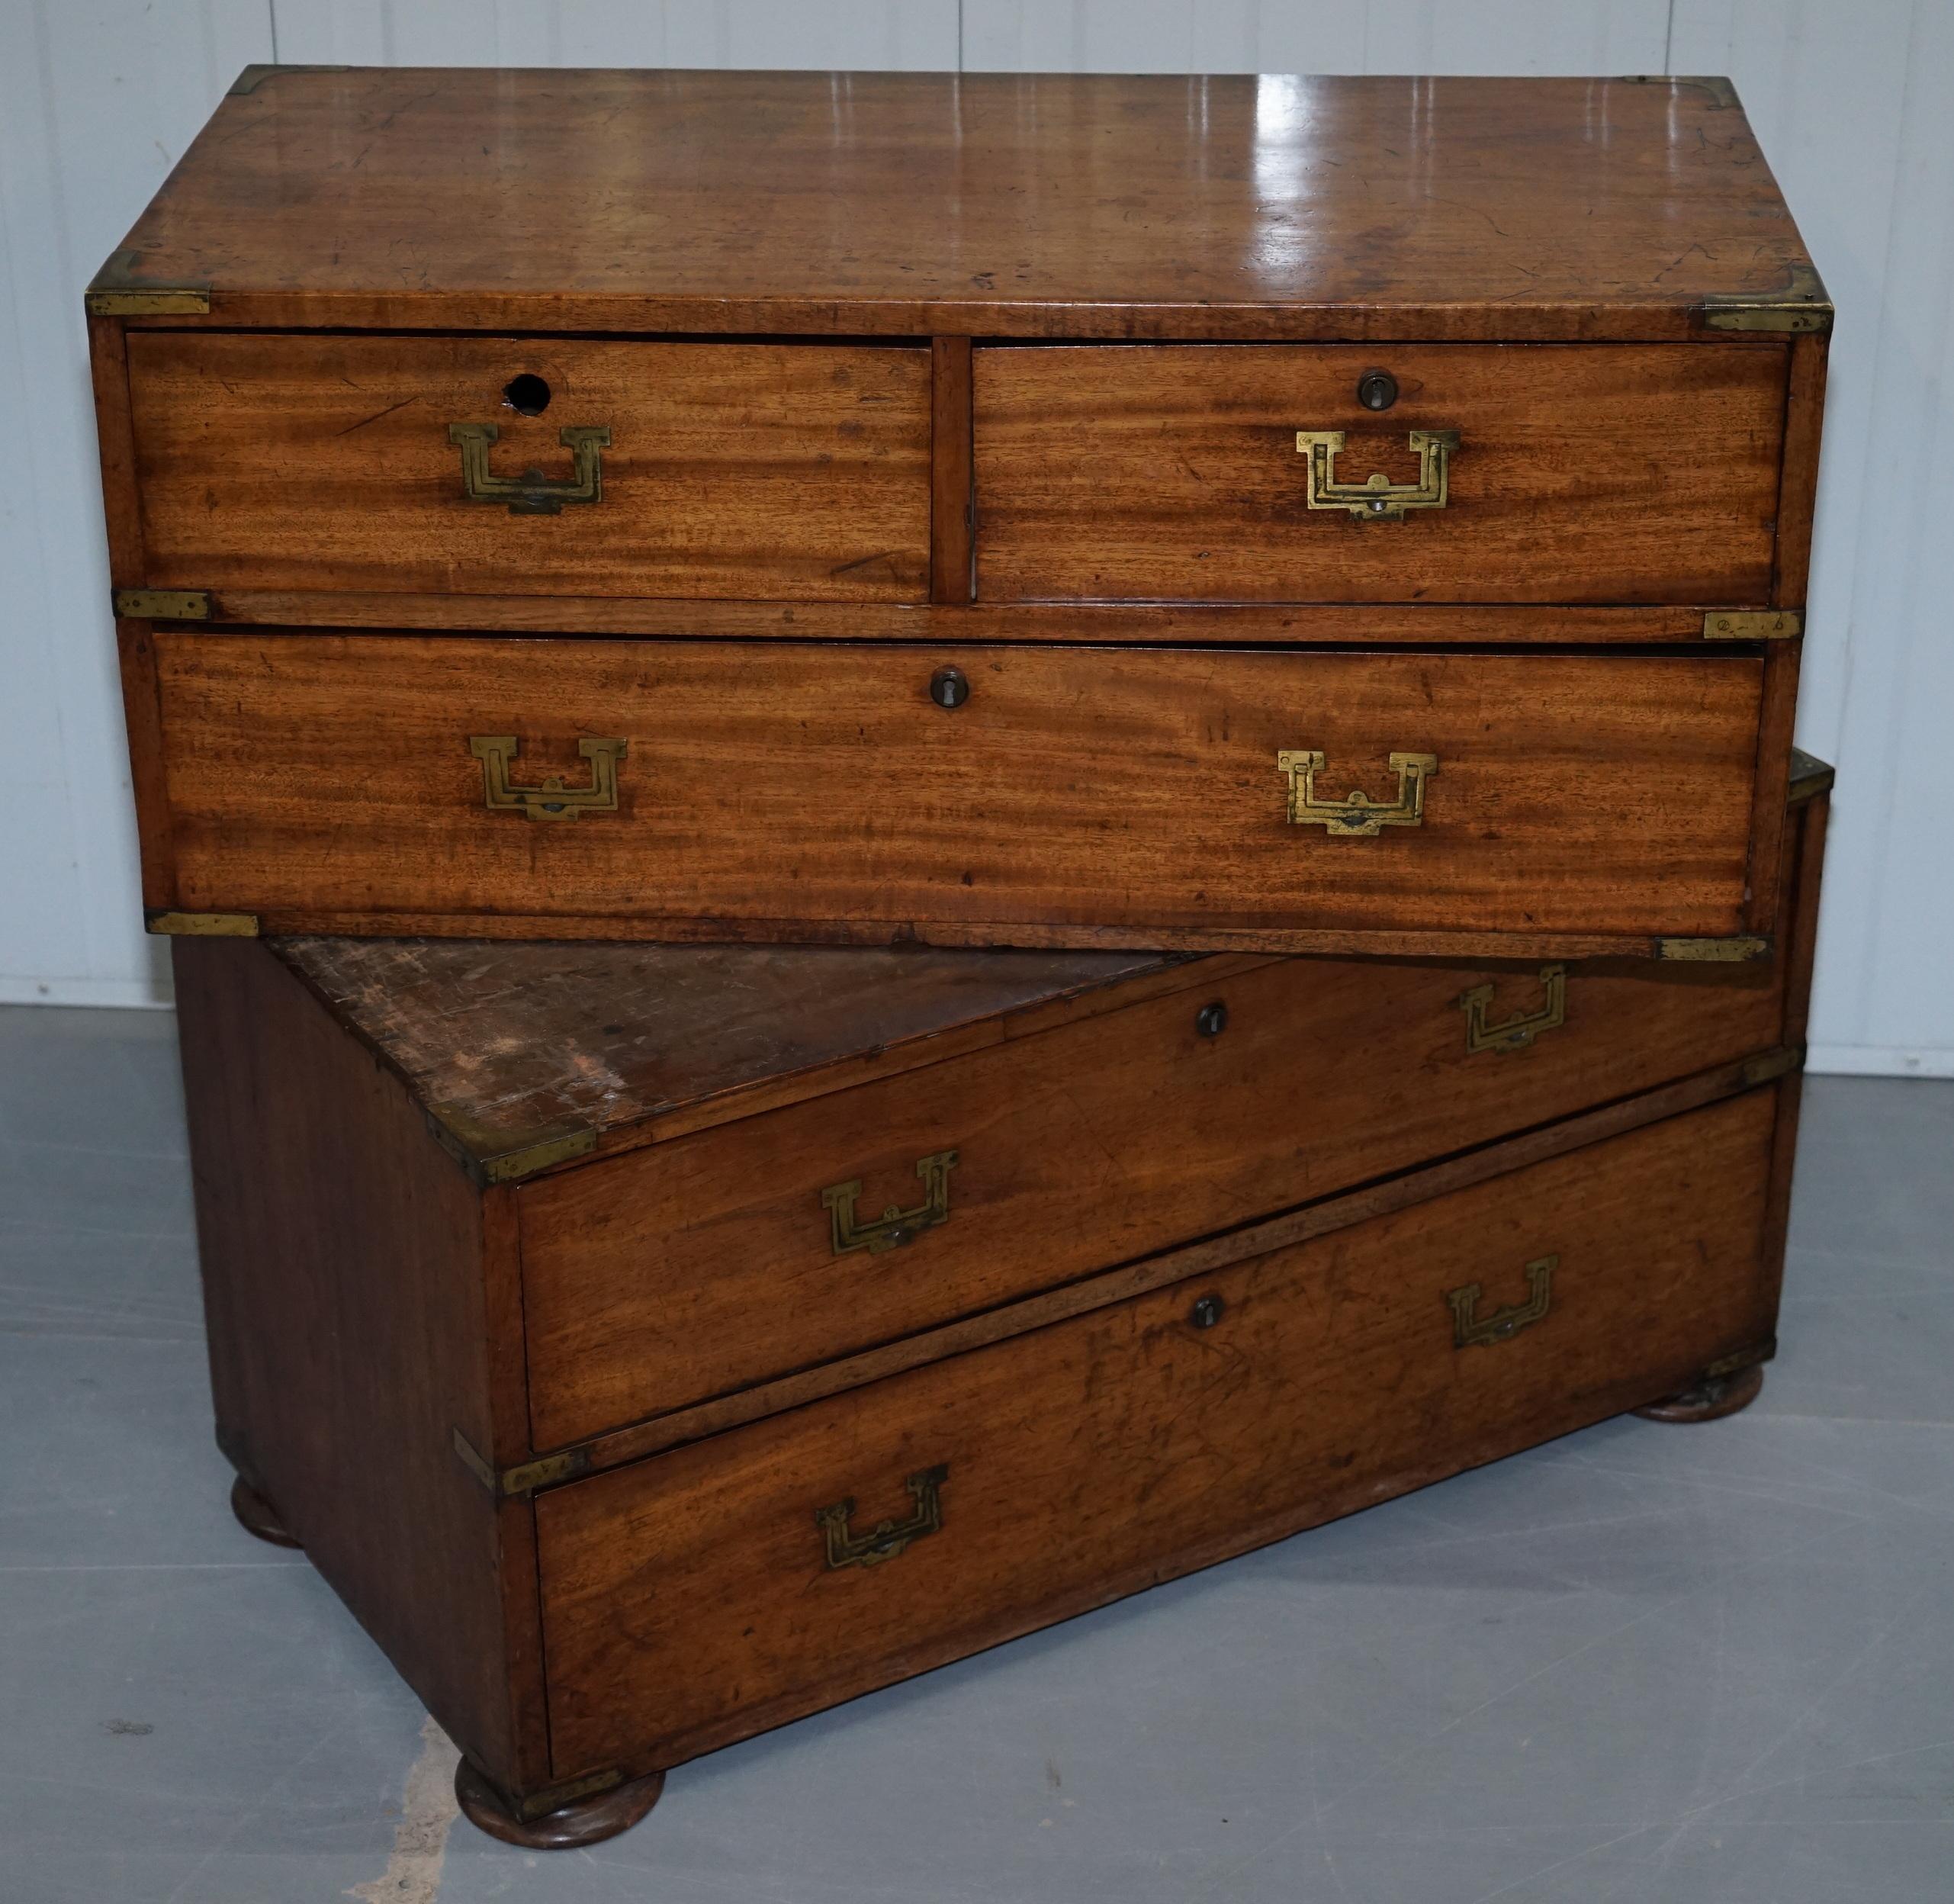 Rare Original 10th February 1813 Uk Napoleonic War Campaign Chest of Drawers 11